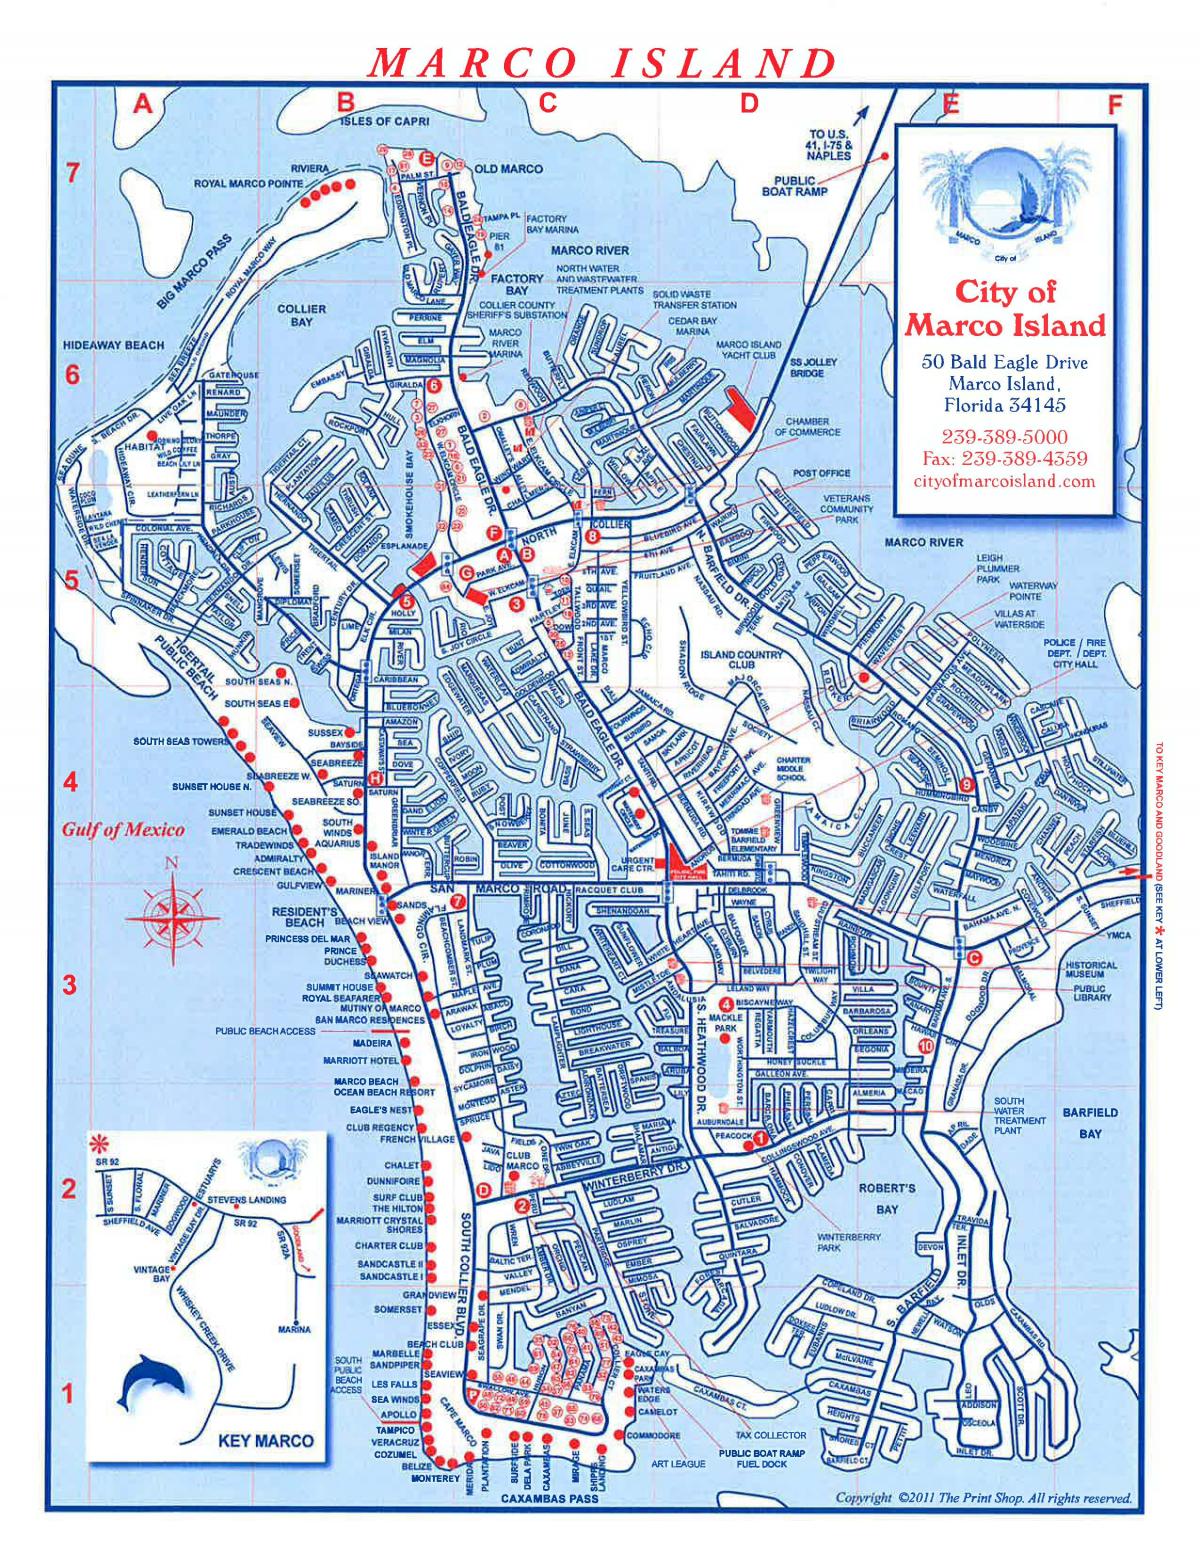 City of Marco Island MAP